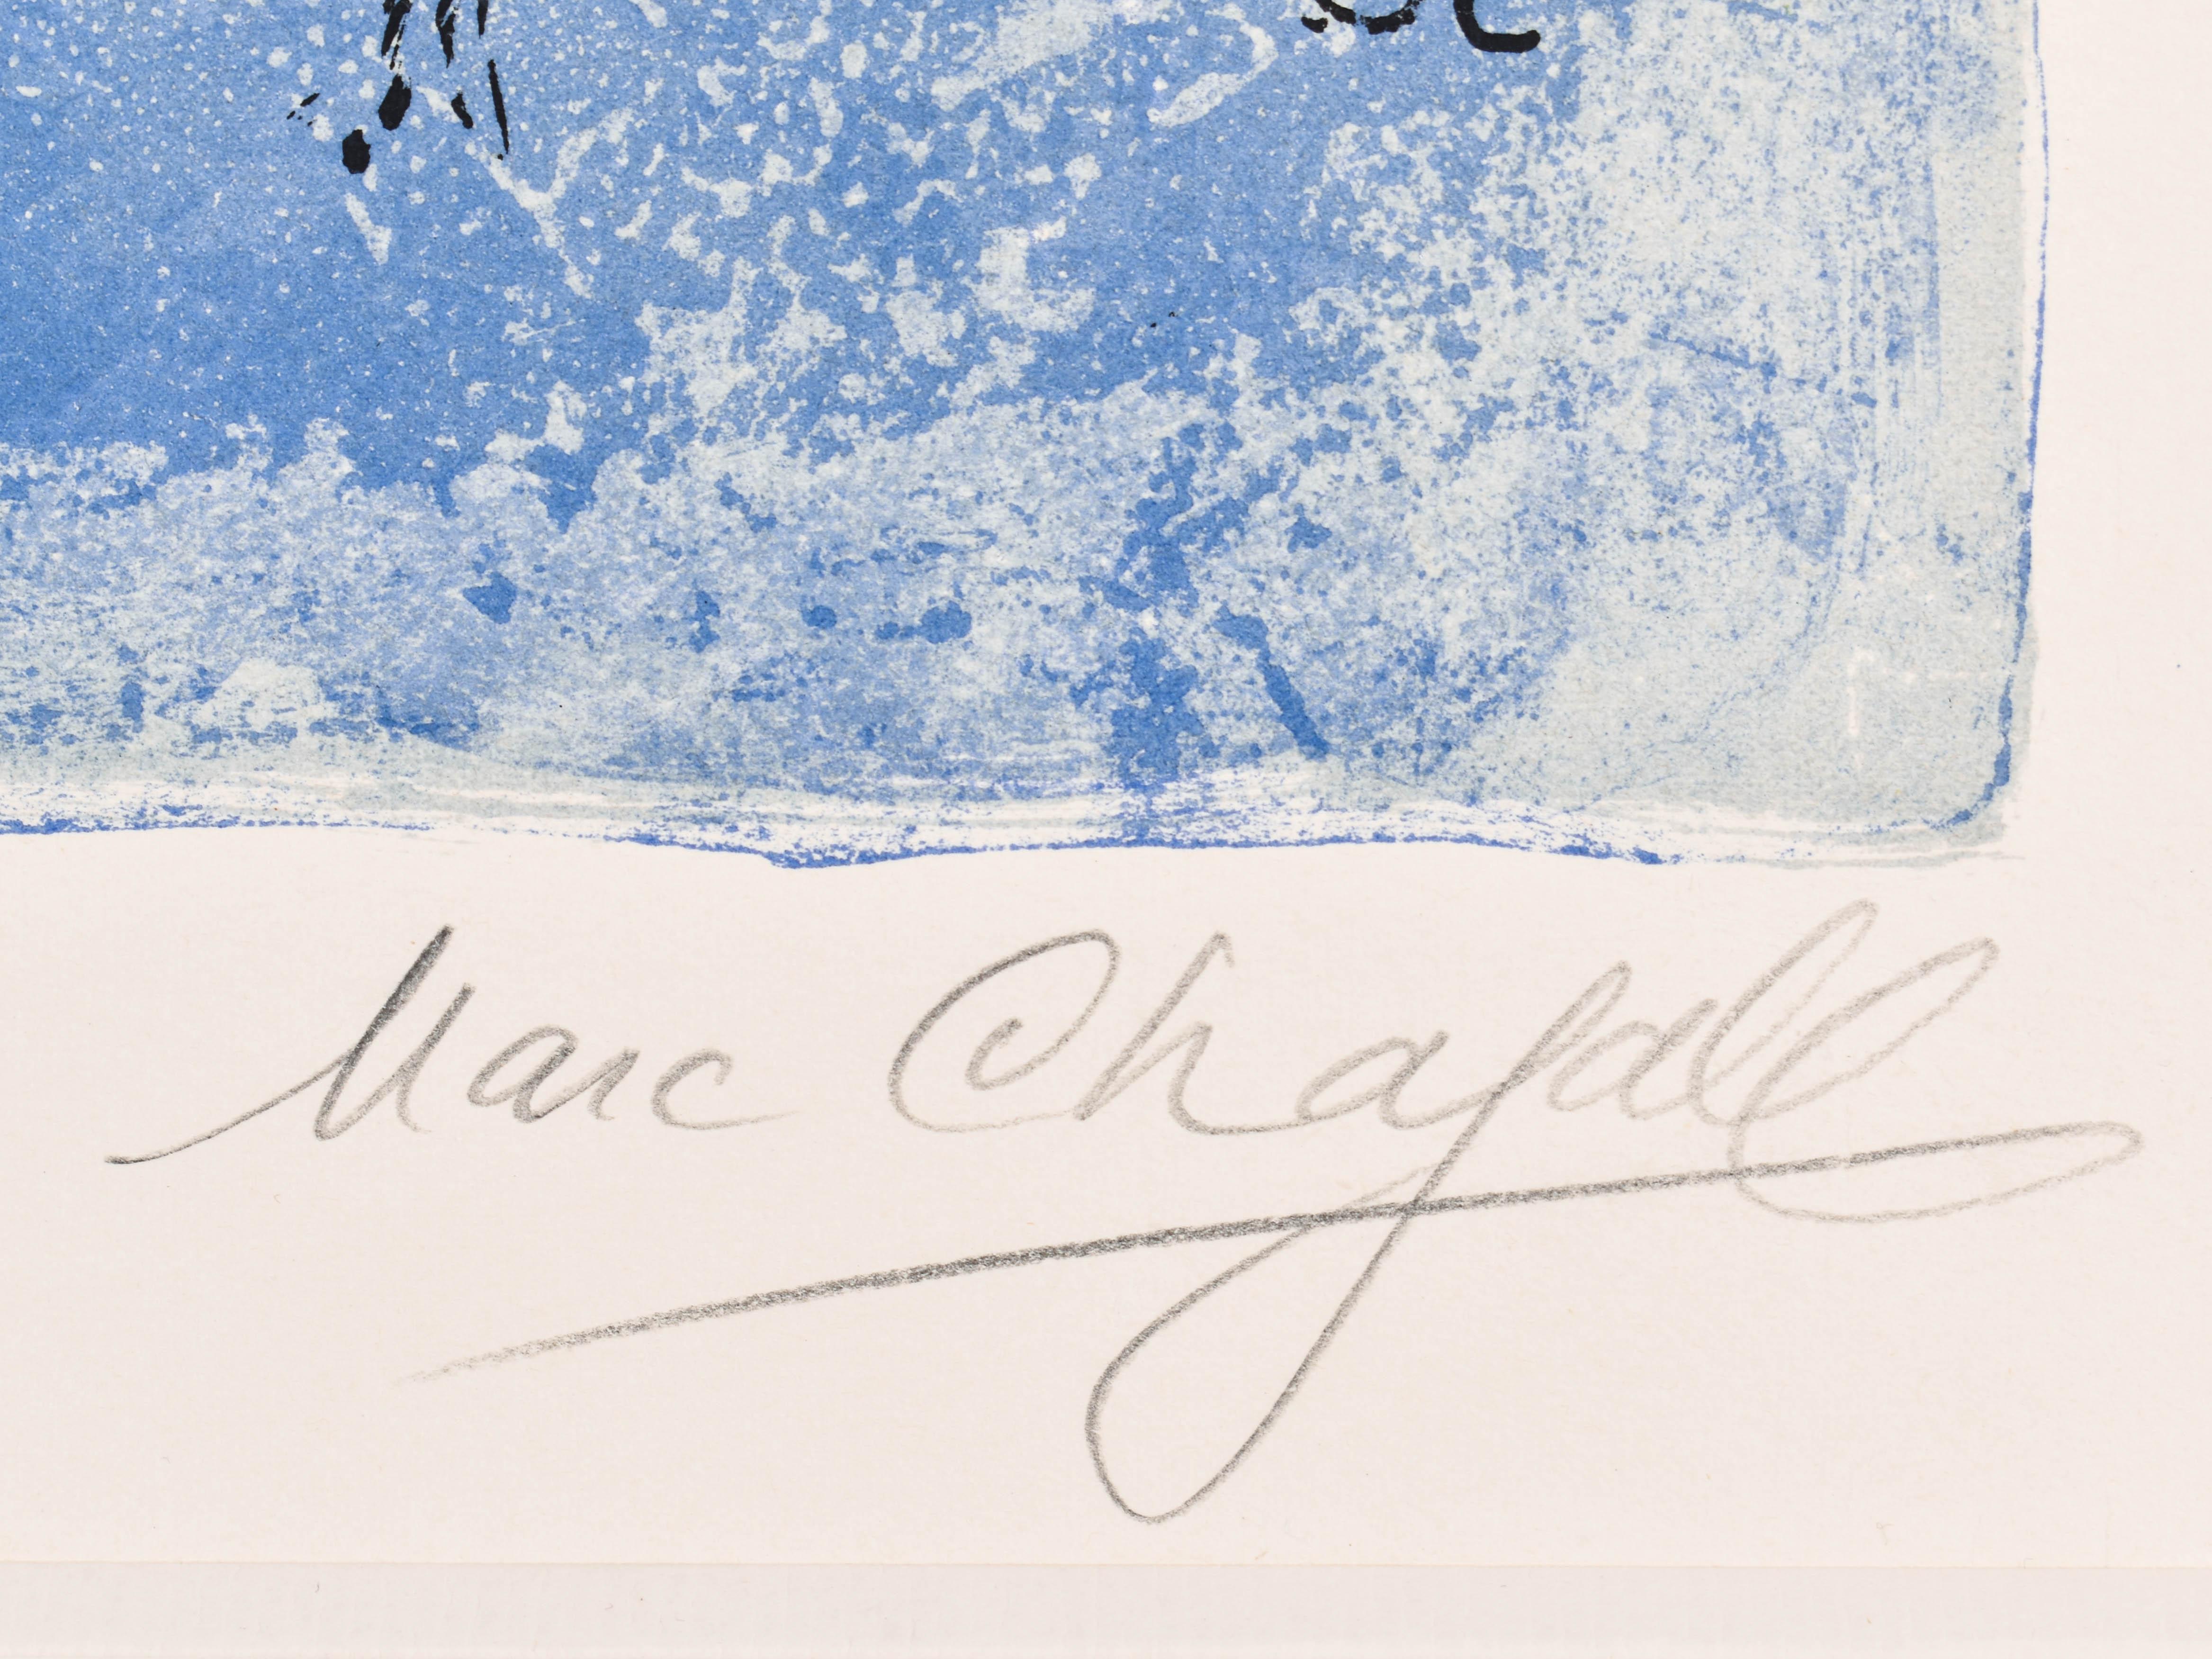 Le ciel blue, Paris - The blue sky of Paris - Lithograph - Hand signed  - Abstract Print by Marc Chagall